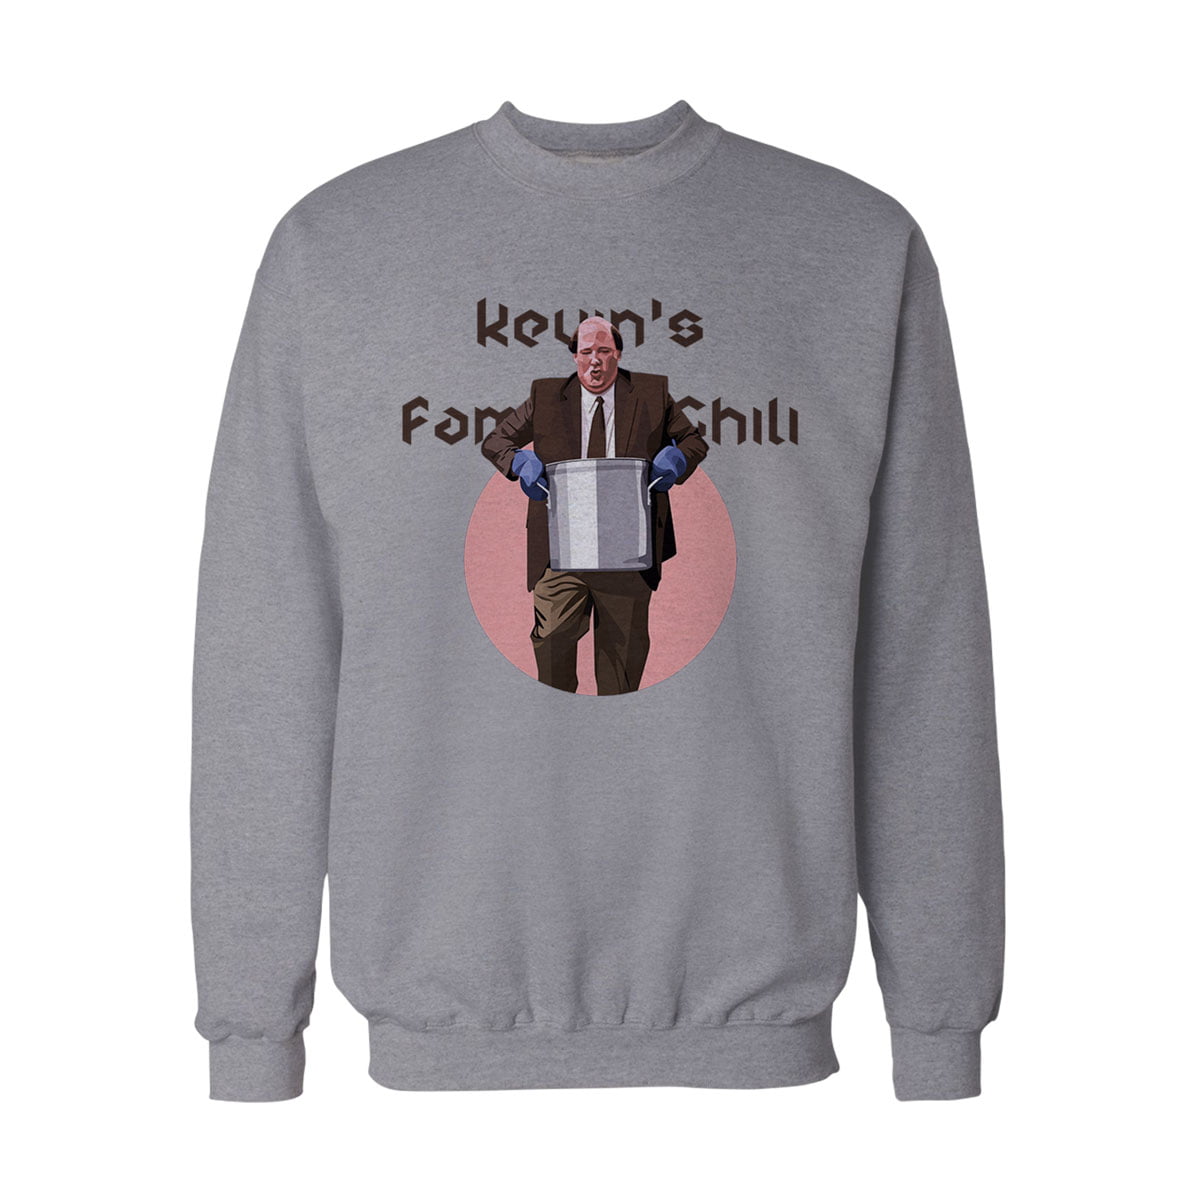 The office kevin famous chili sweatshirt g 1 - kevin's famous chili - the office unisex sweatshirt - figurex